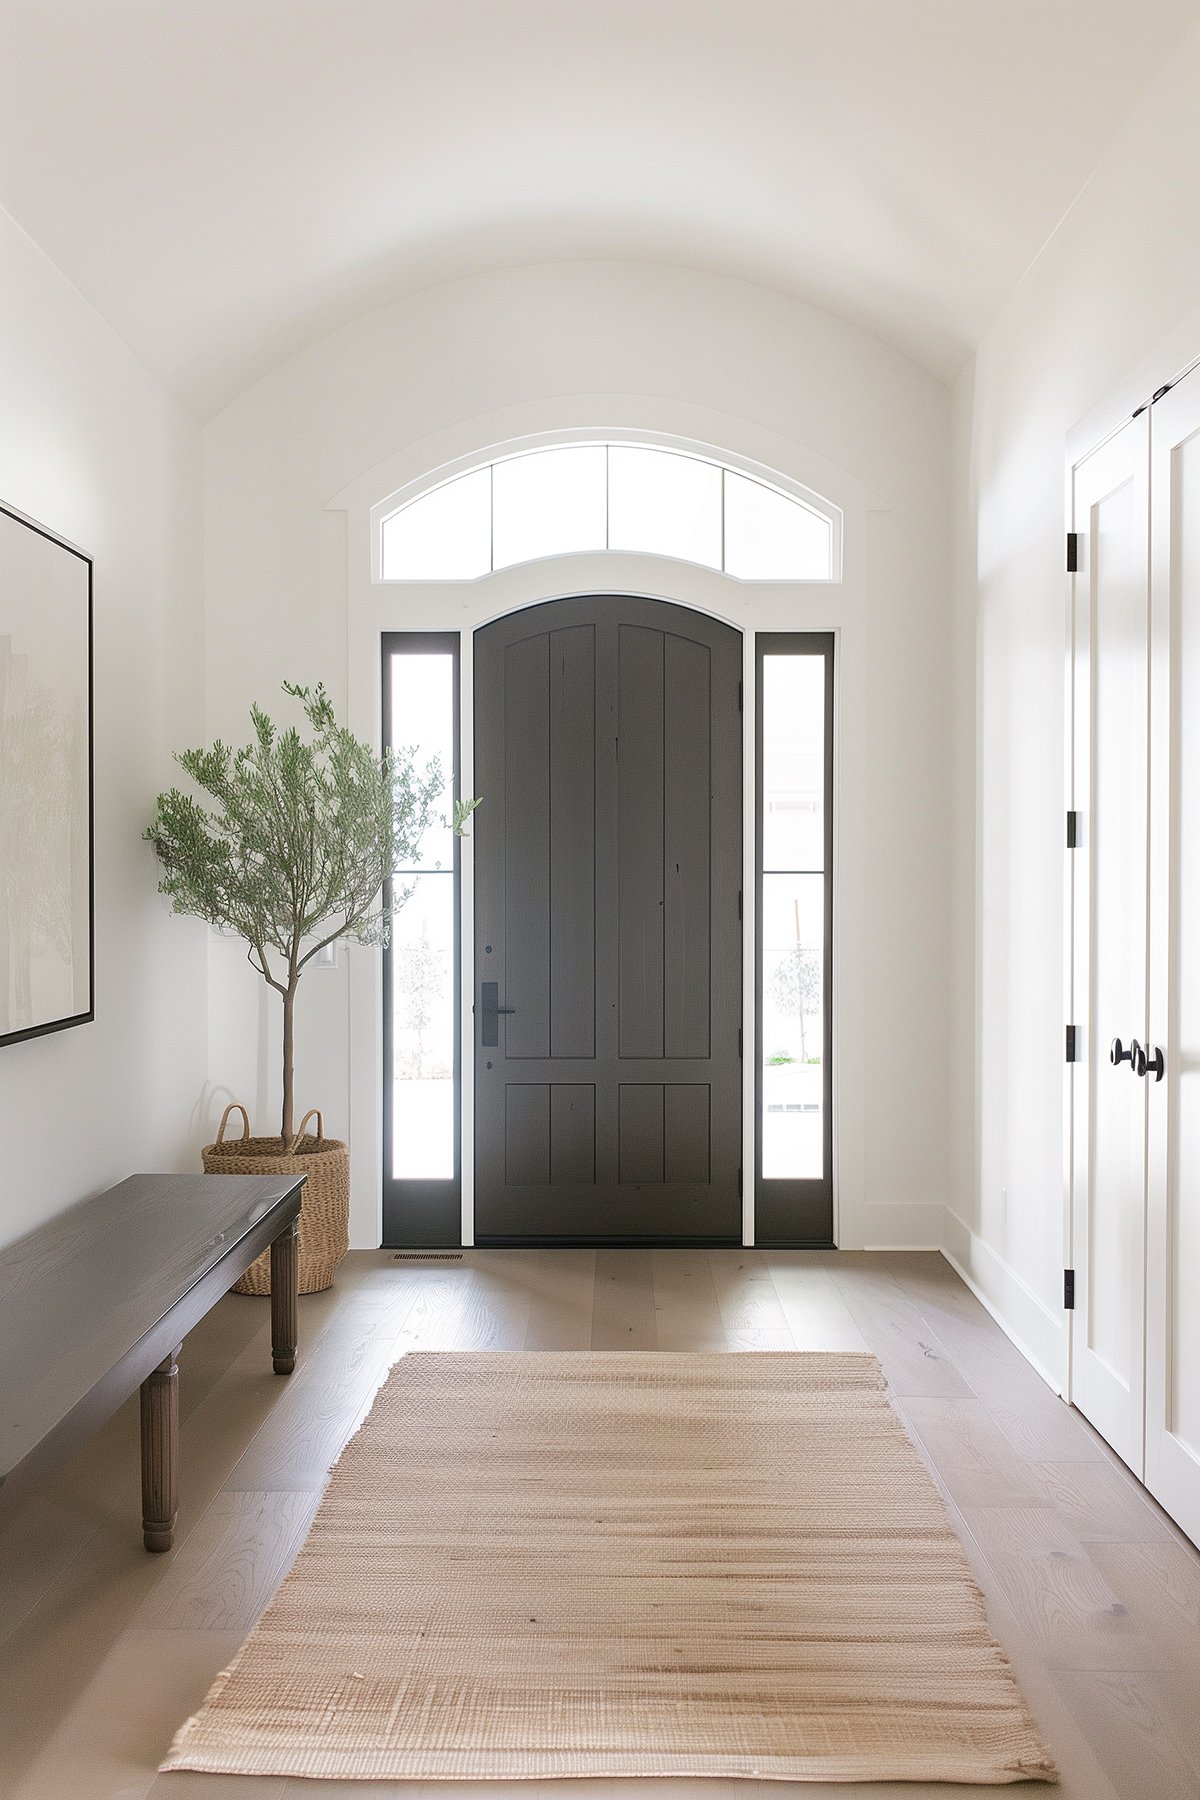 Large entryway with white walls, a wooden bench and a front door painted Sherwin Williams Urbane Bronze on the interior side.